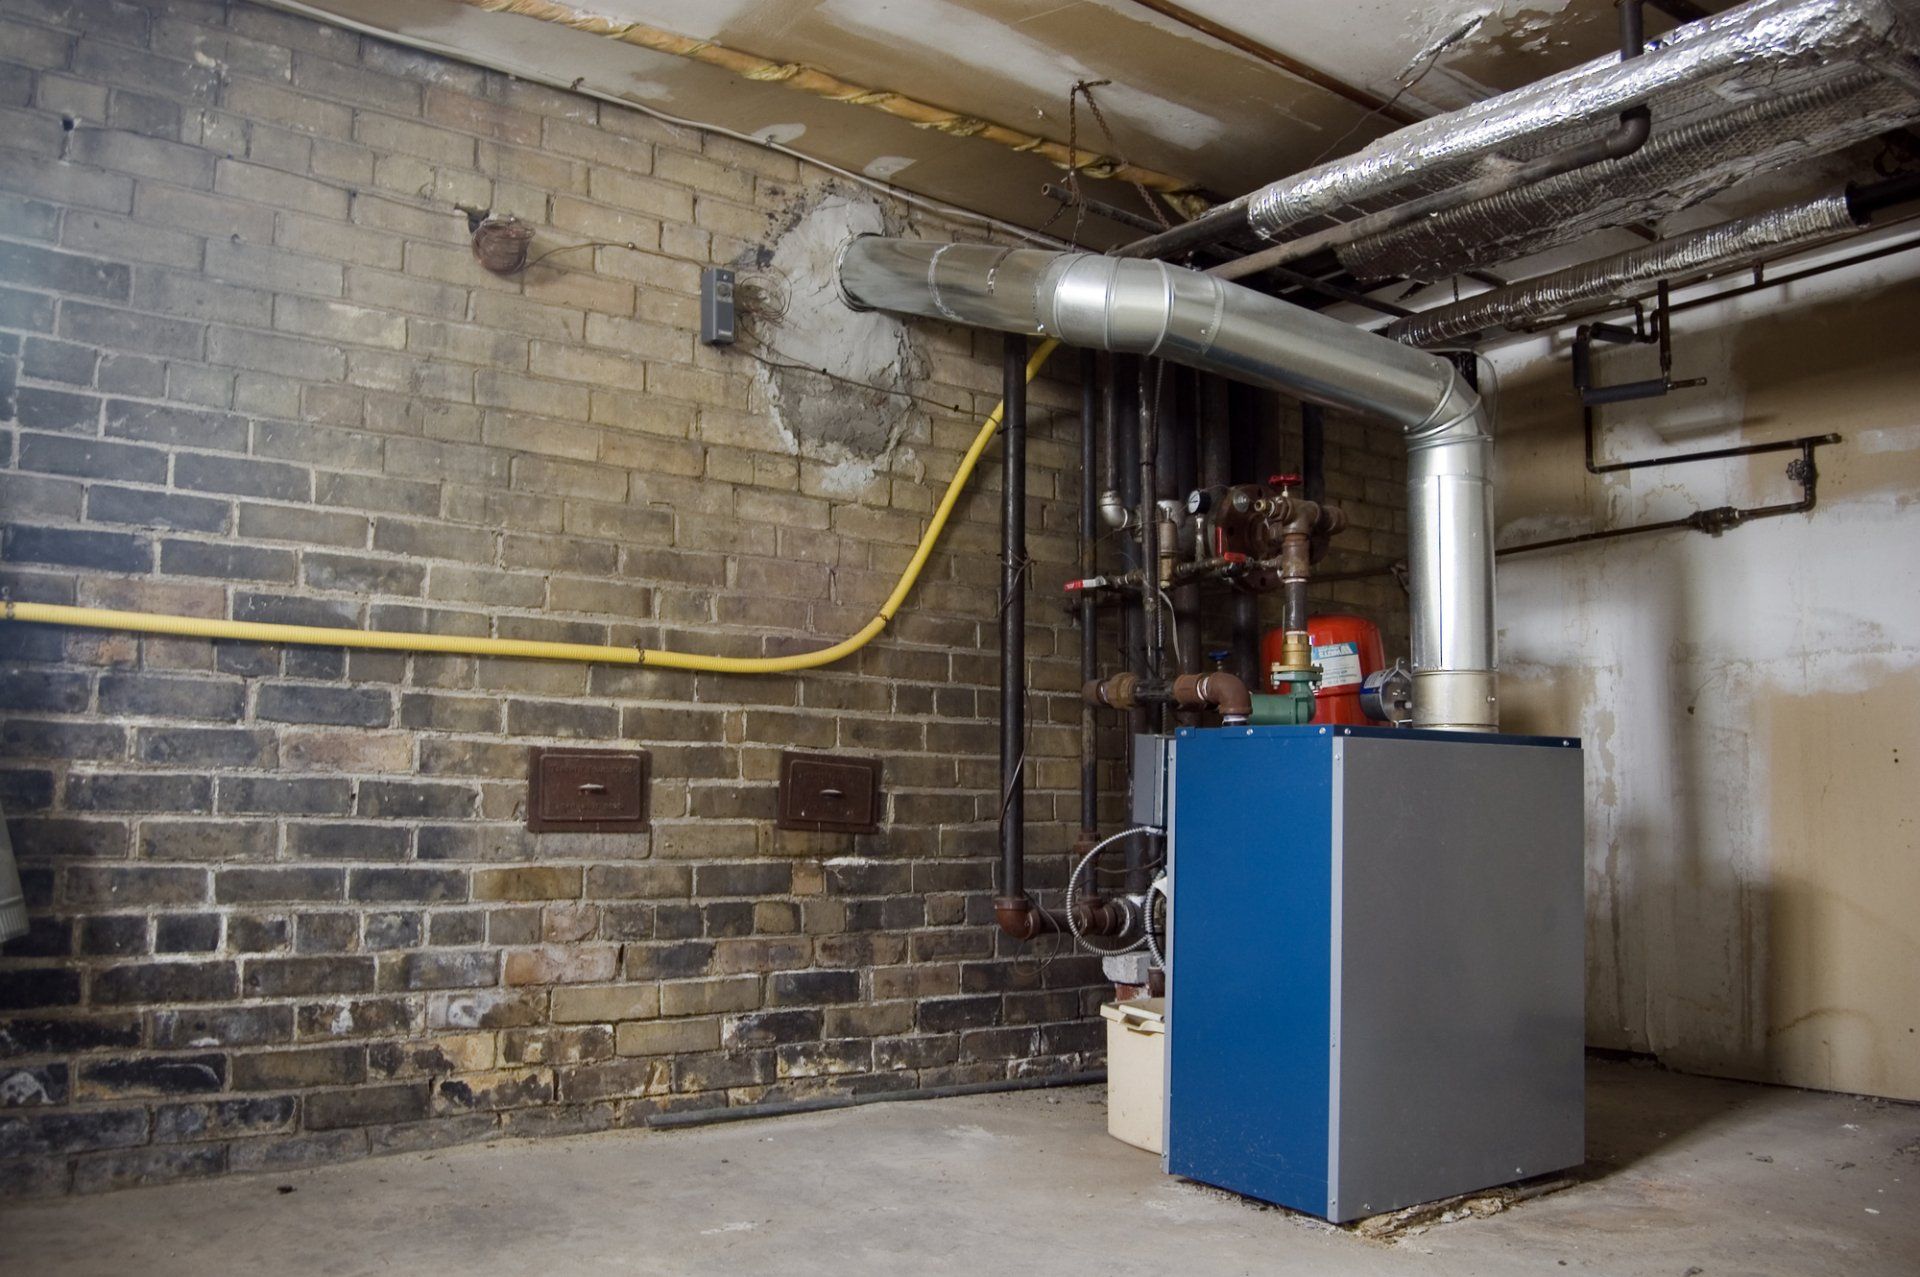 How Does A Furnace Work?